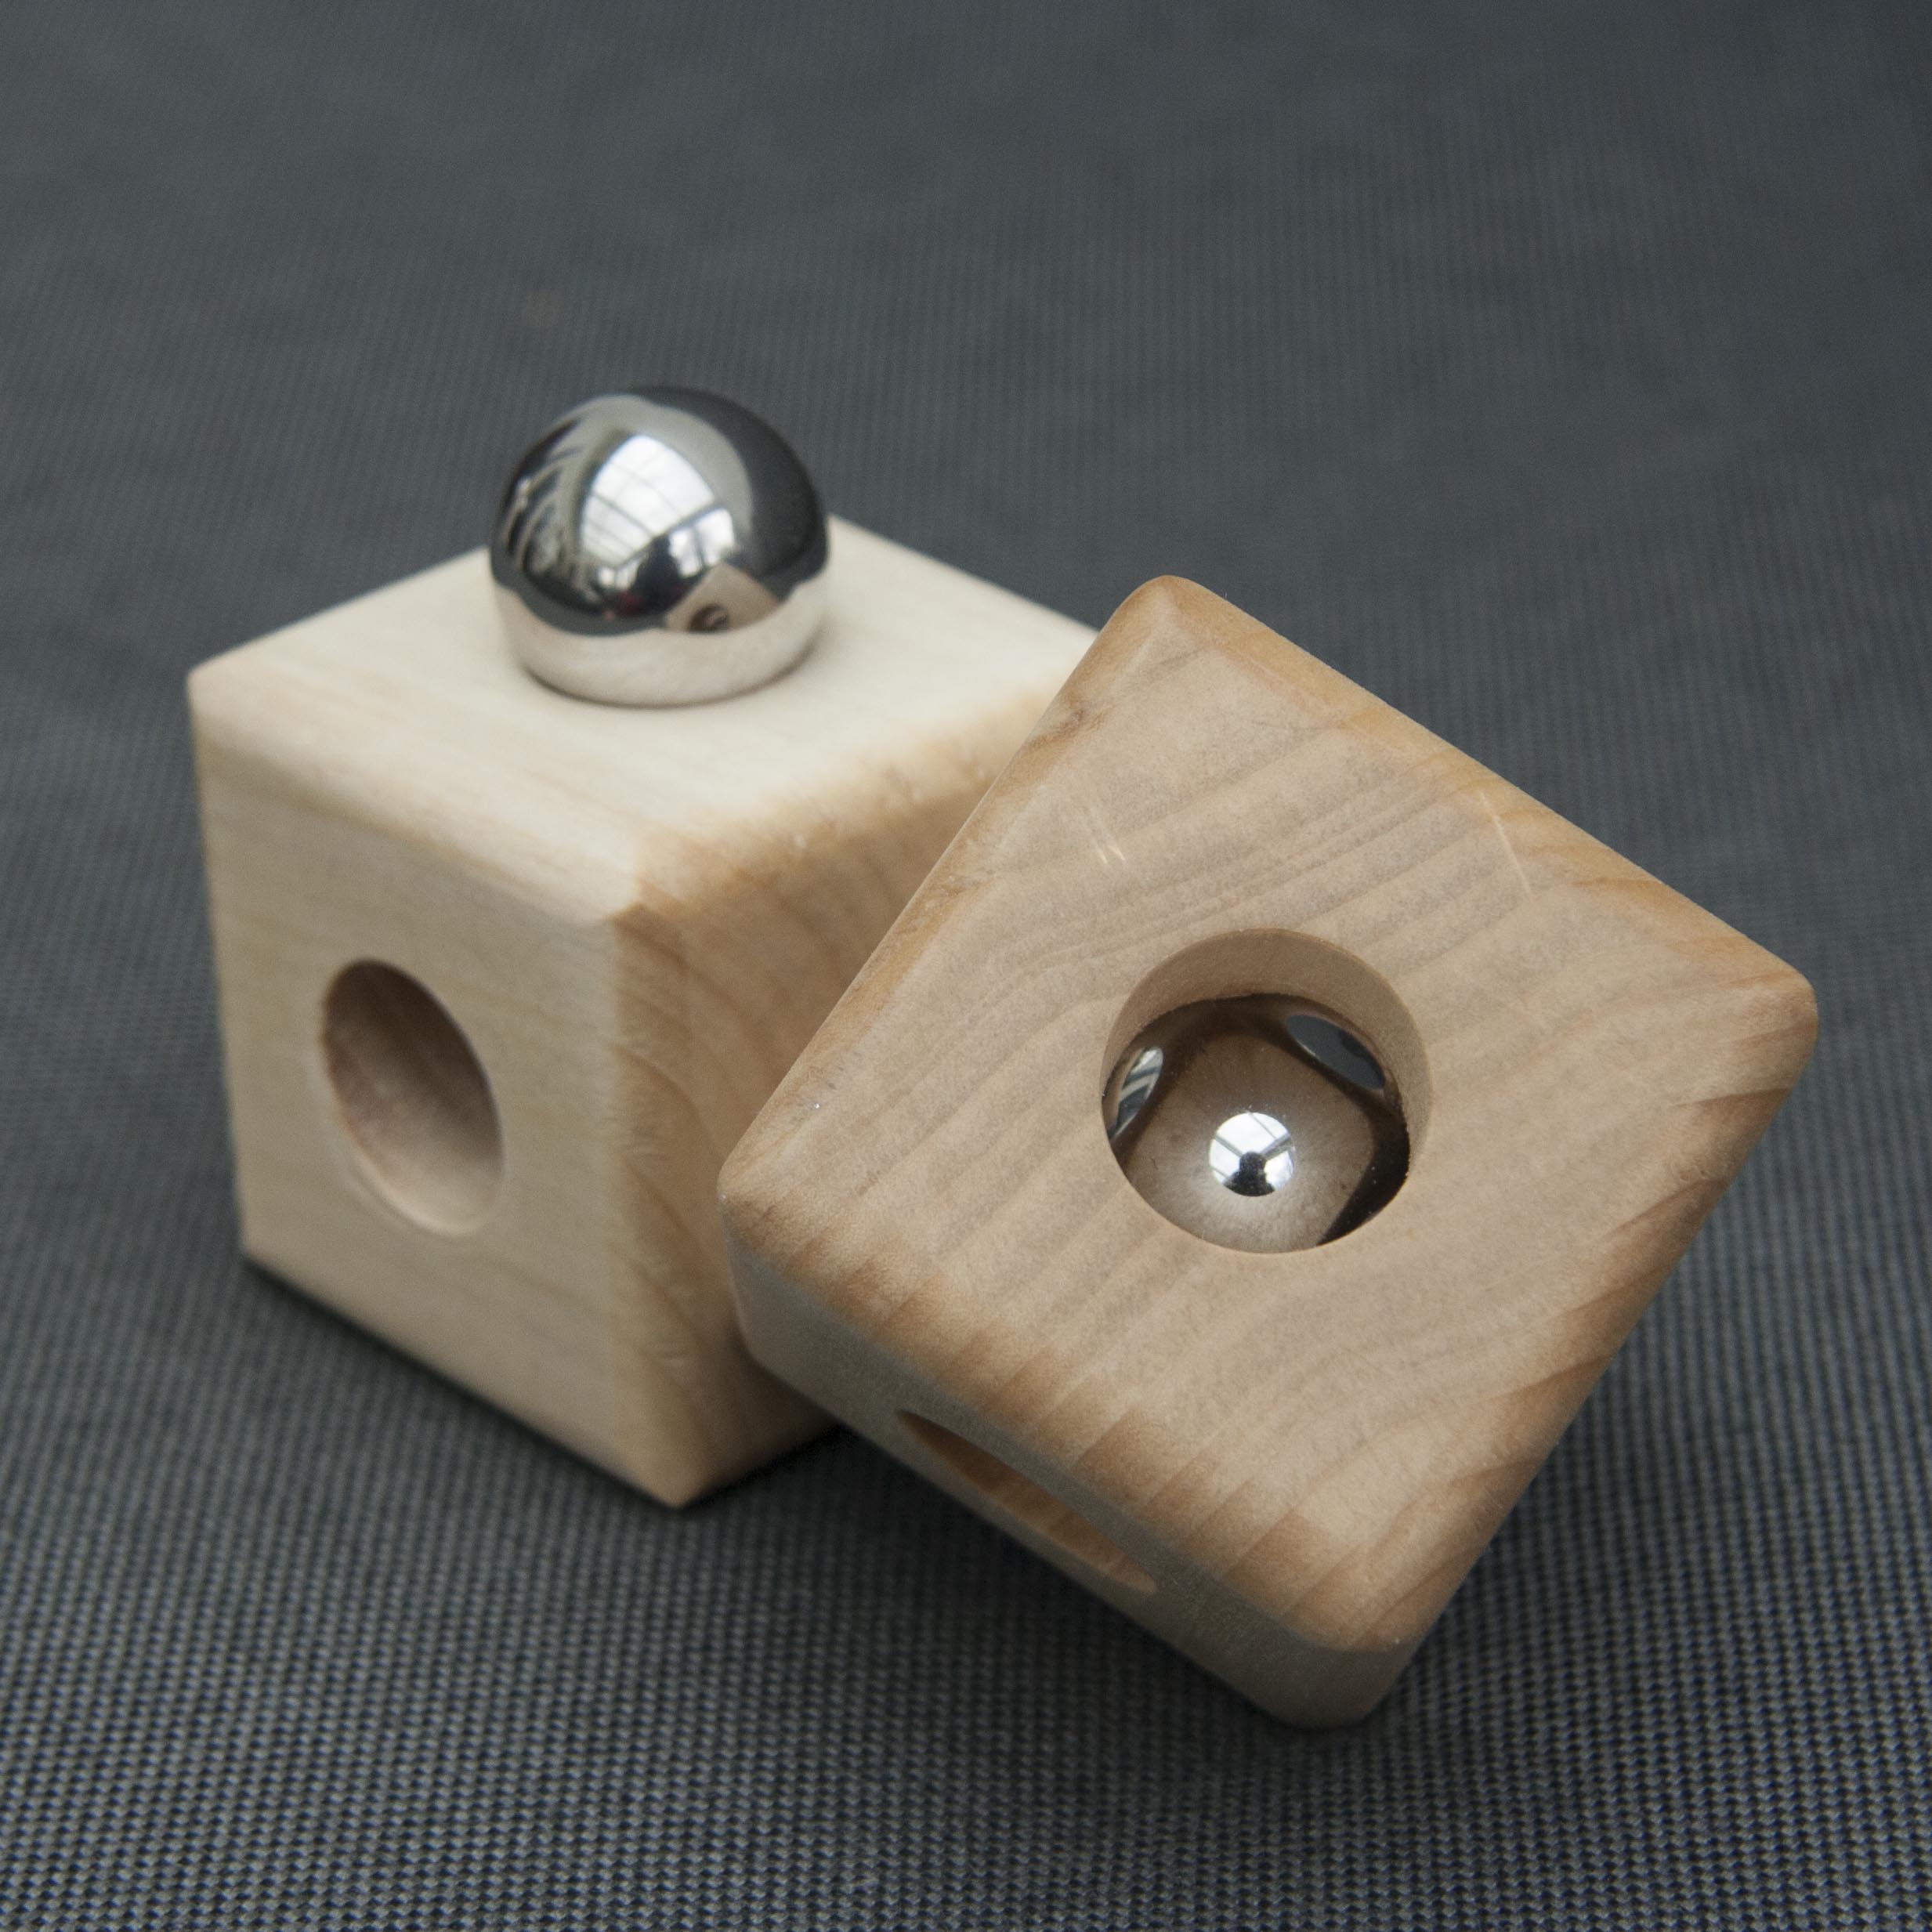 ball in cube gadget